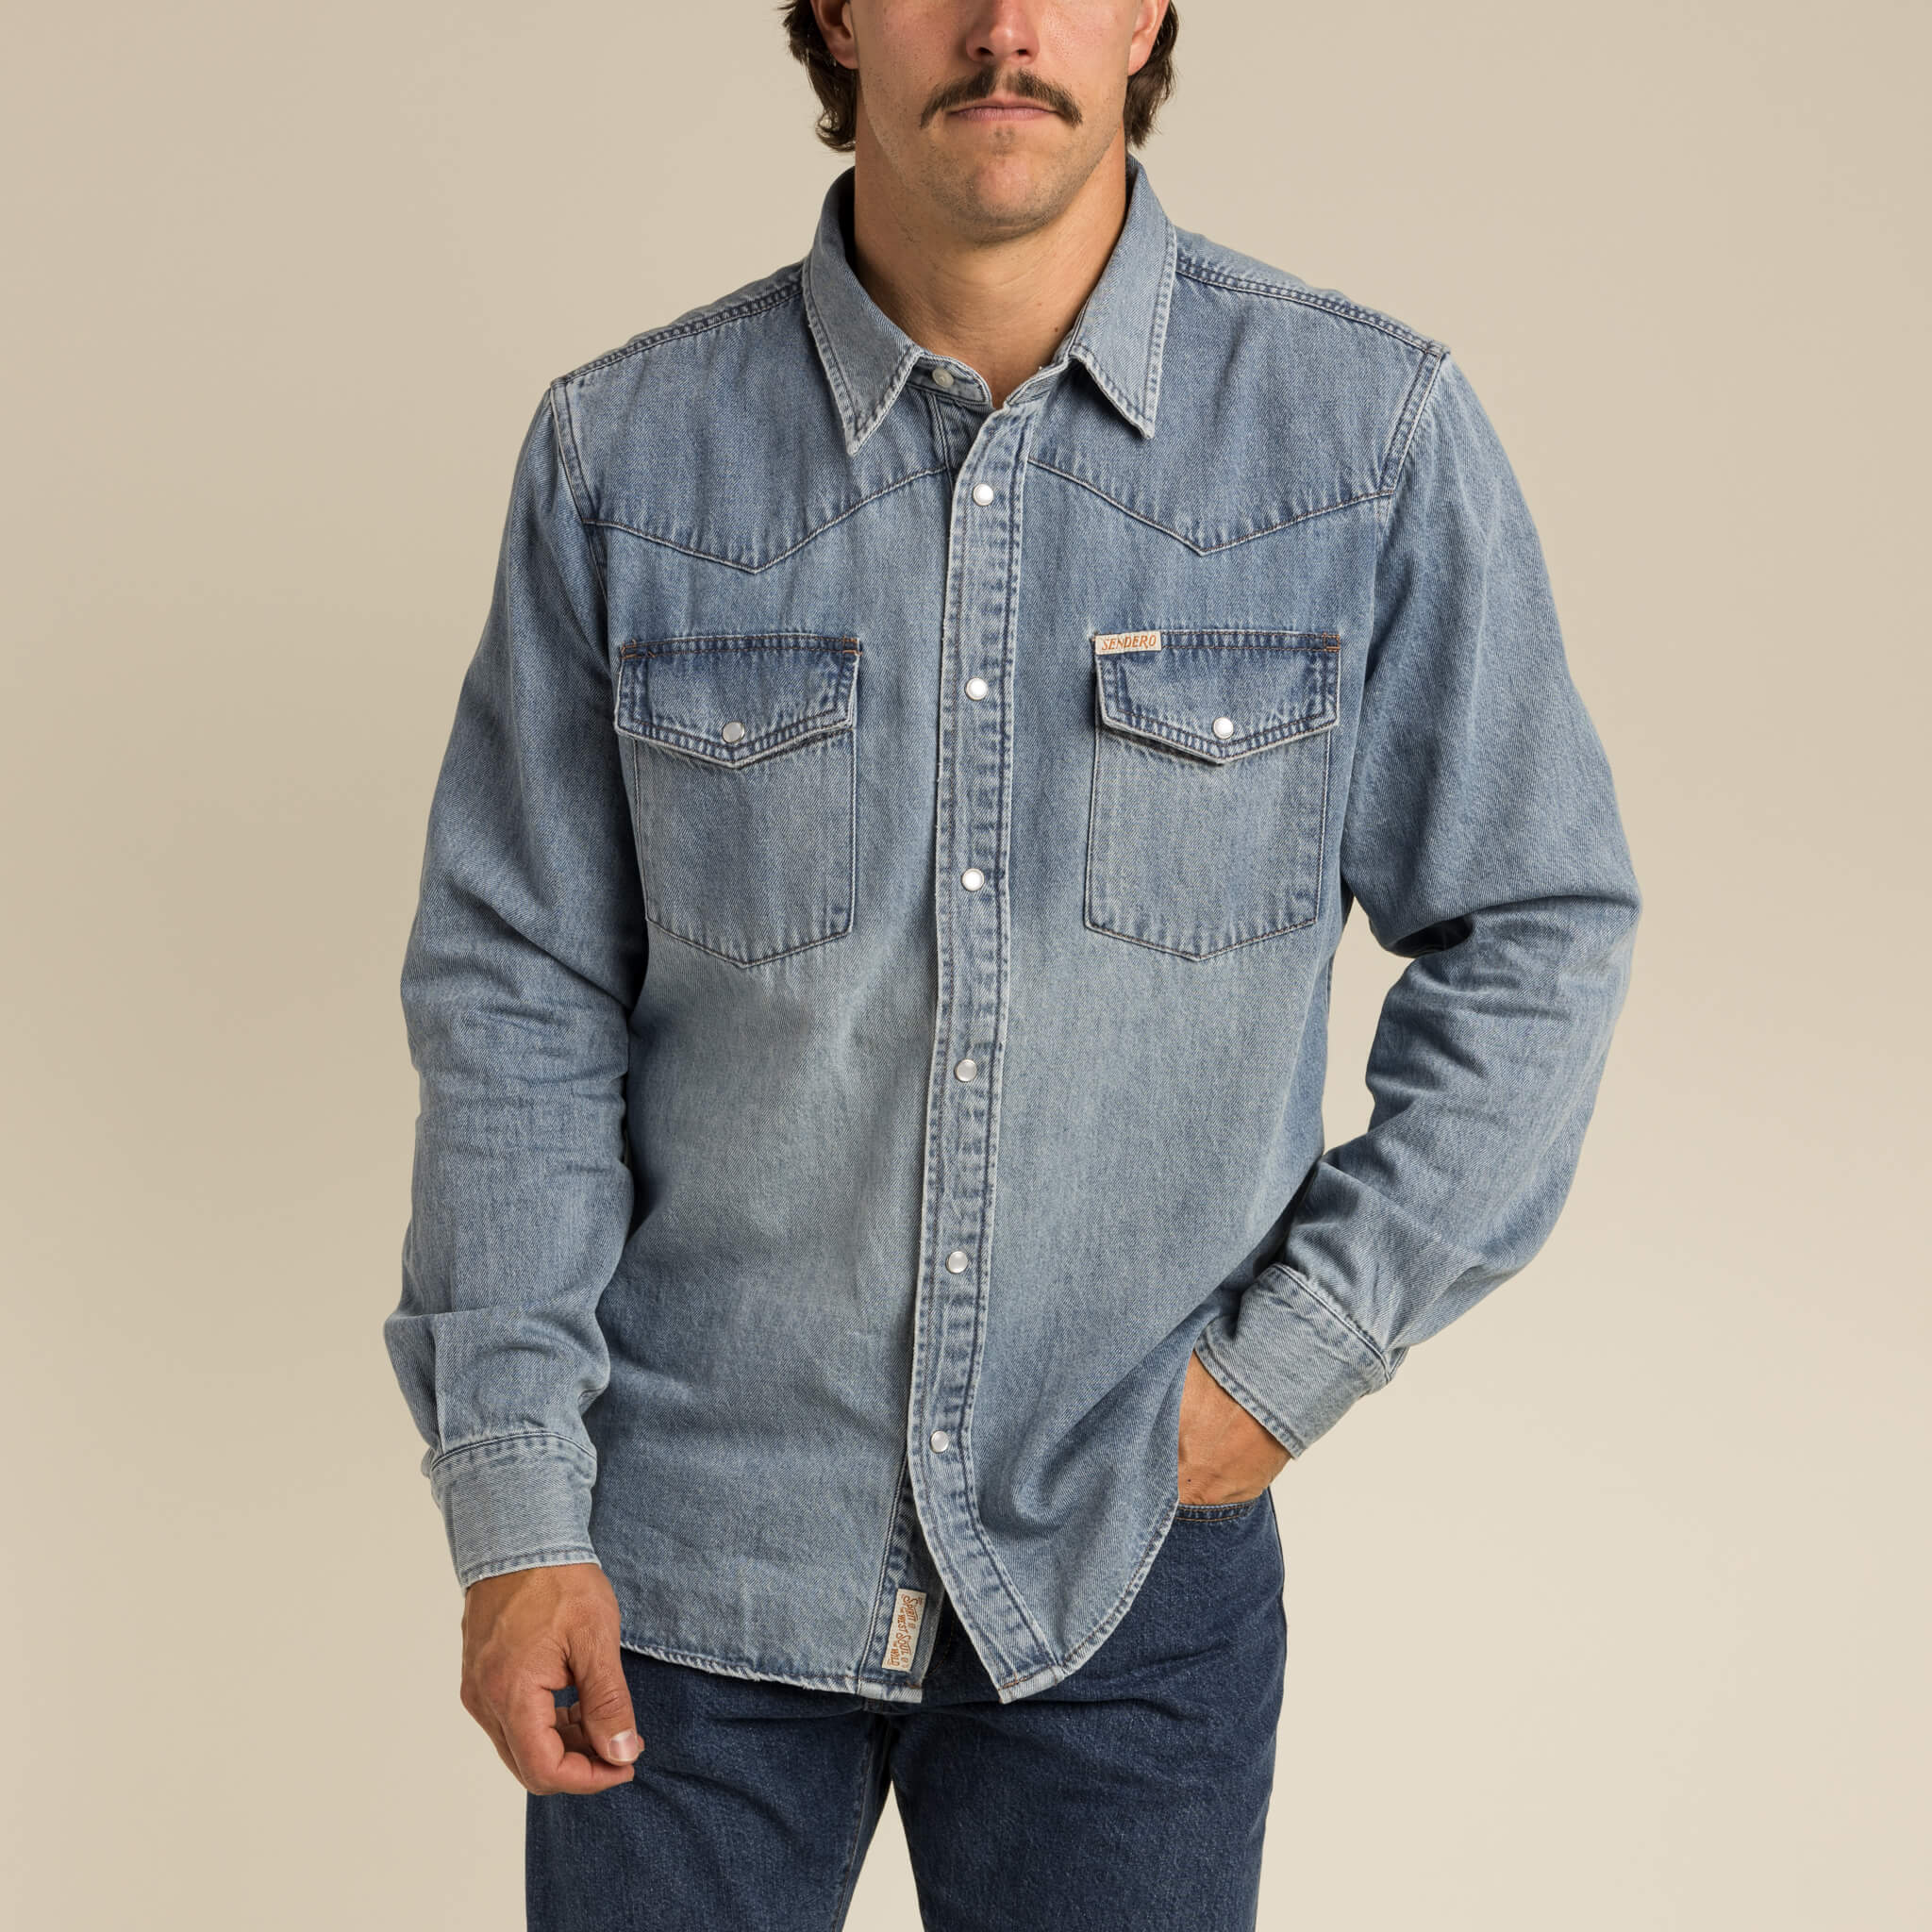 How the Pearl Snap Shirt Maintains Its Otherworldly Popularity - 5280